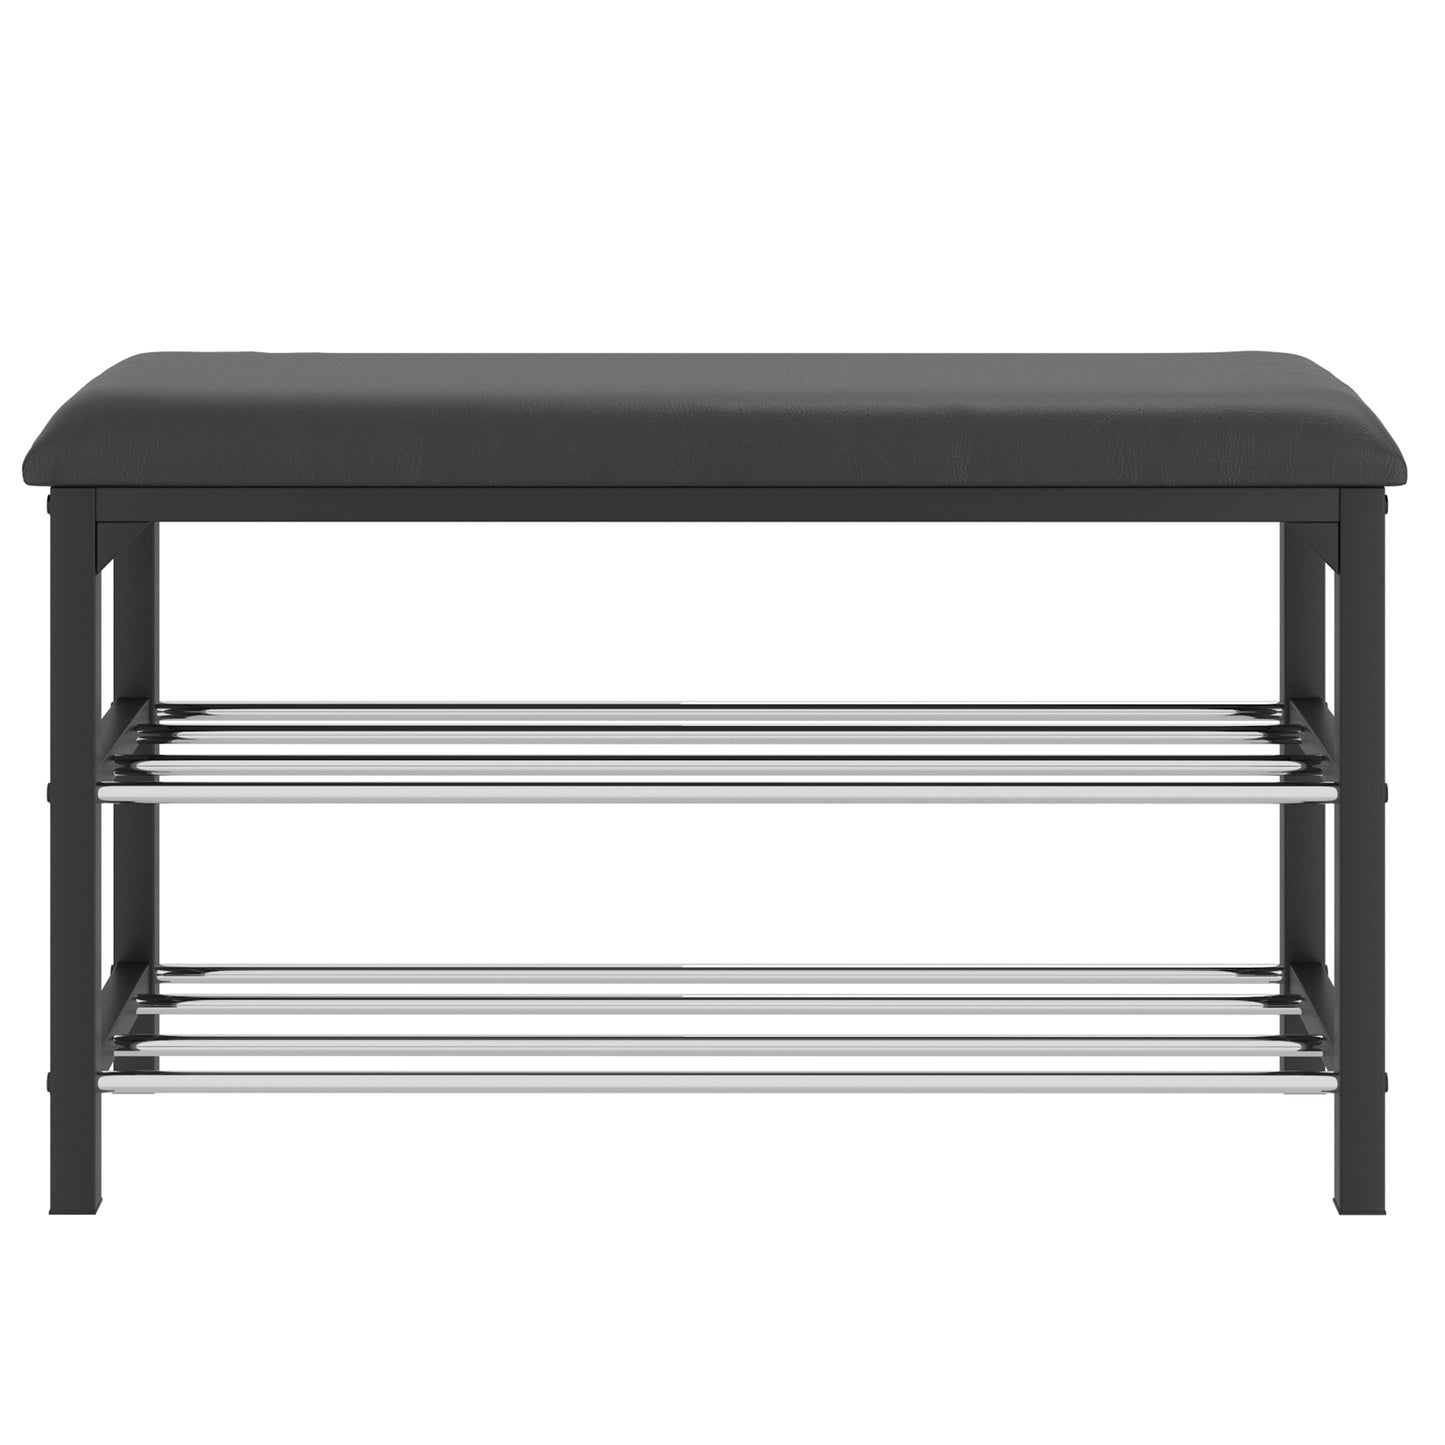 (FOSTER BLACK)- LEATHER- STORAGE BENCH/ SHOE RACK- INVENTORY CLEARANCE